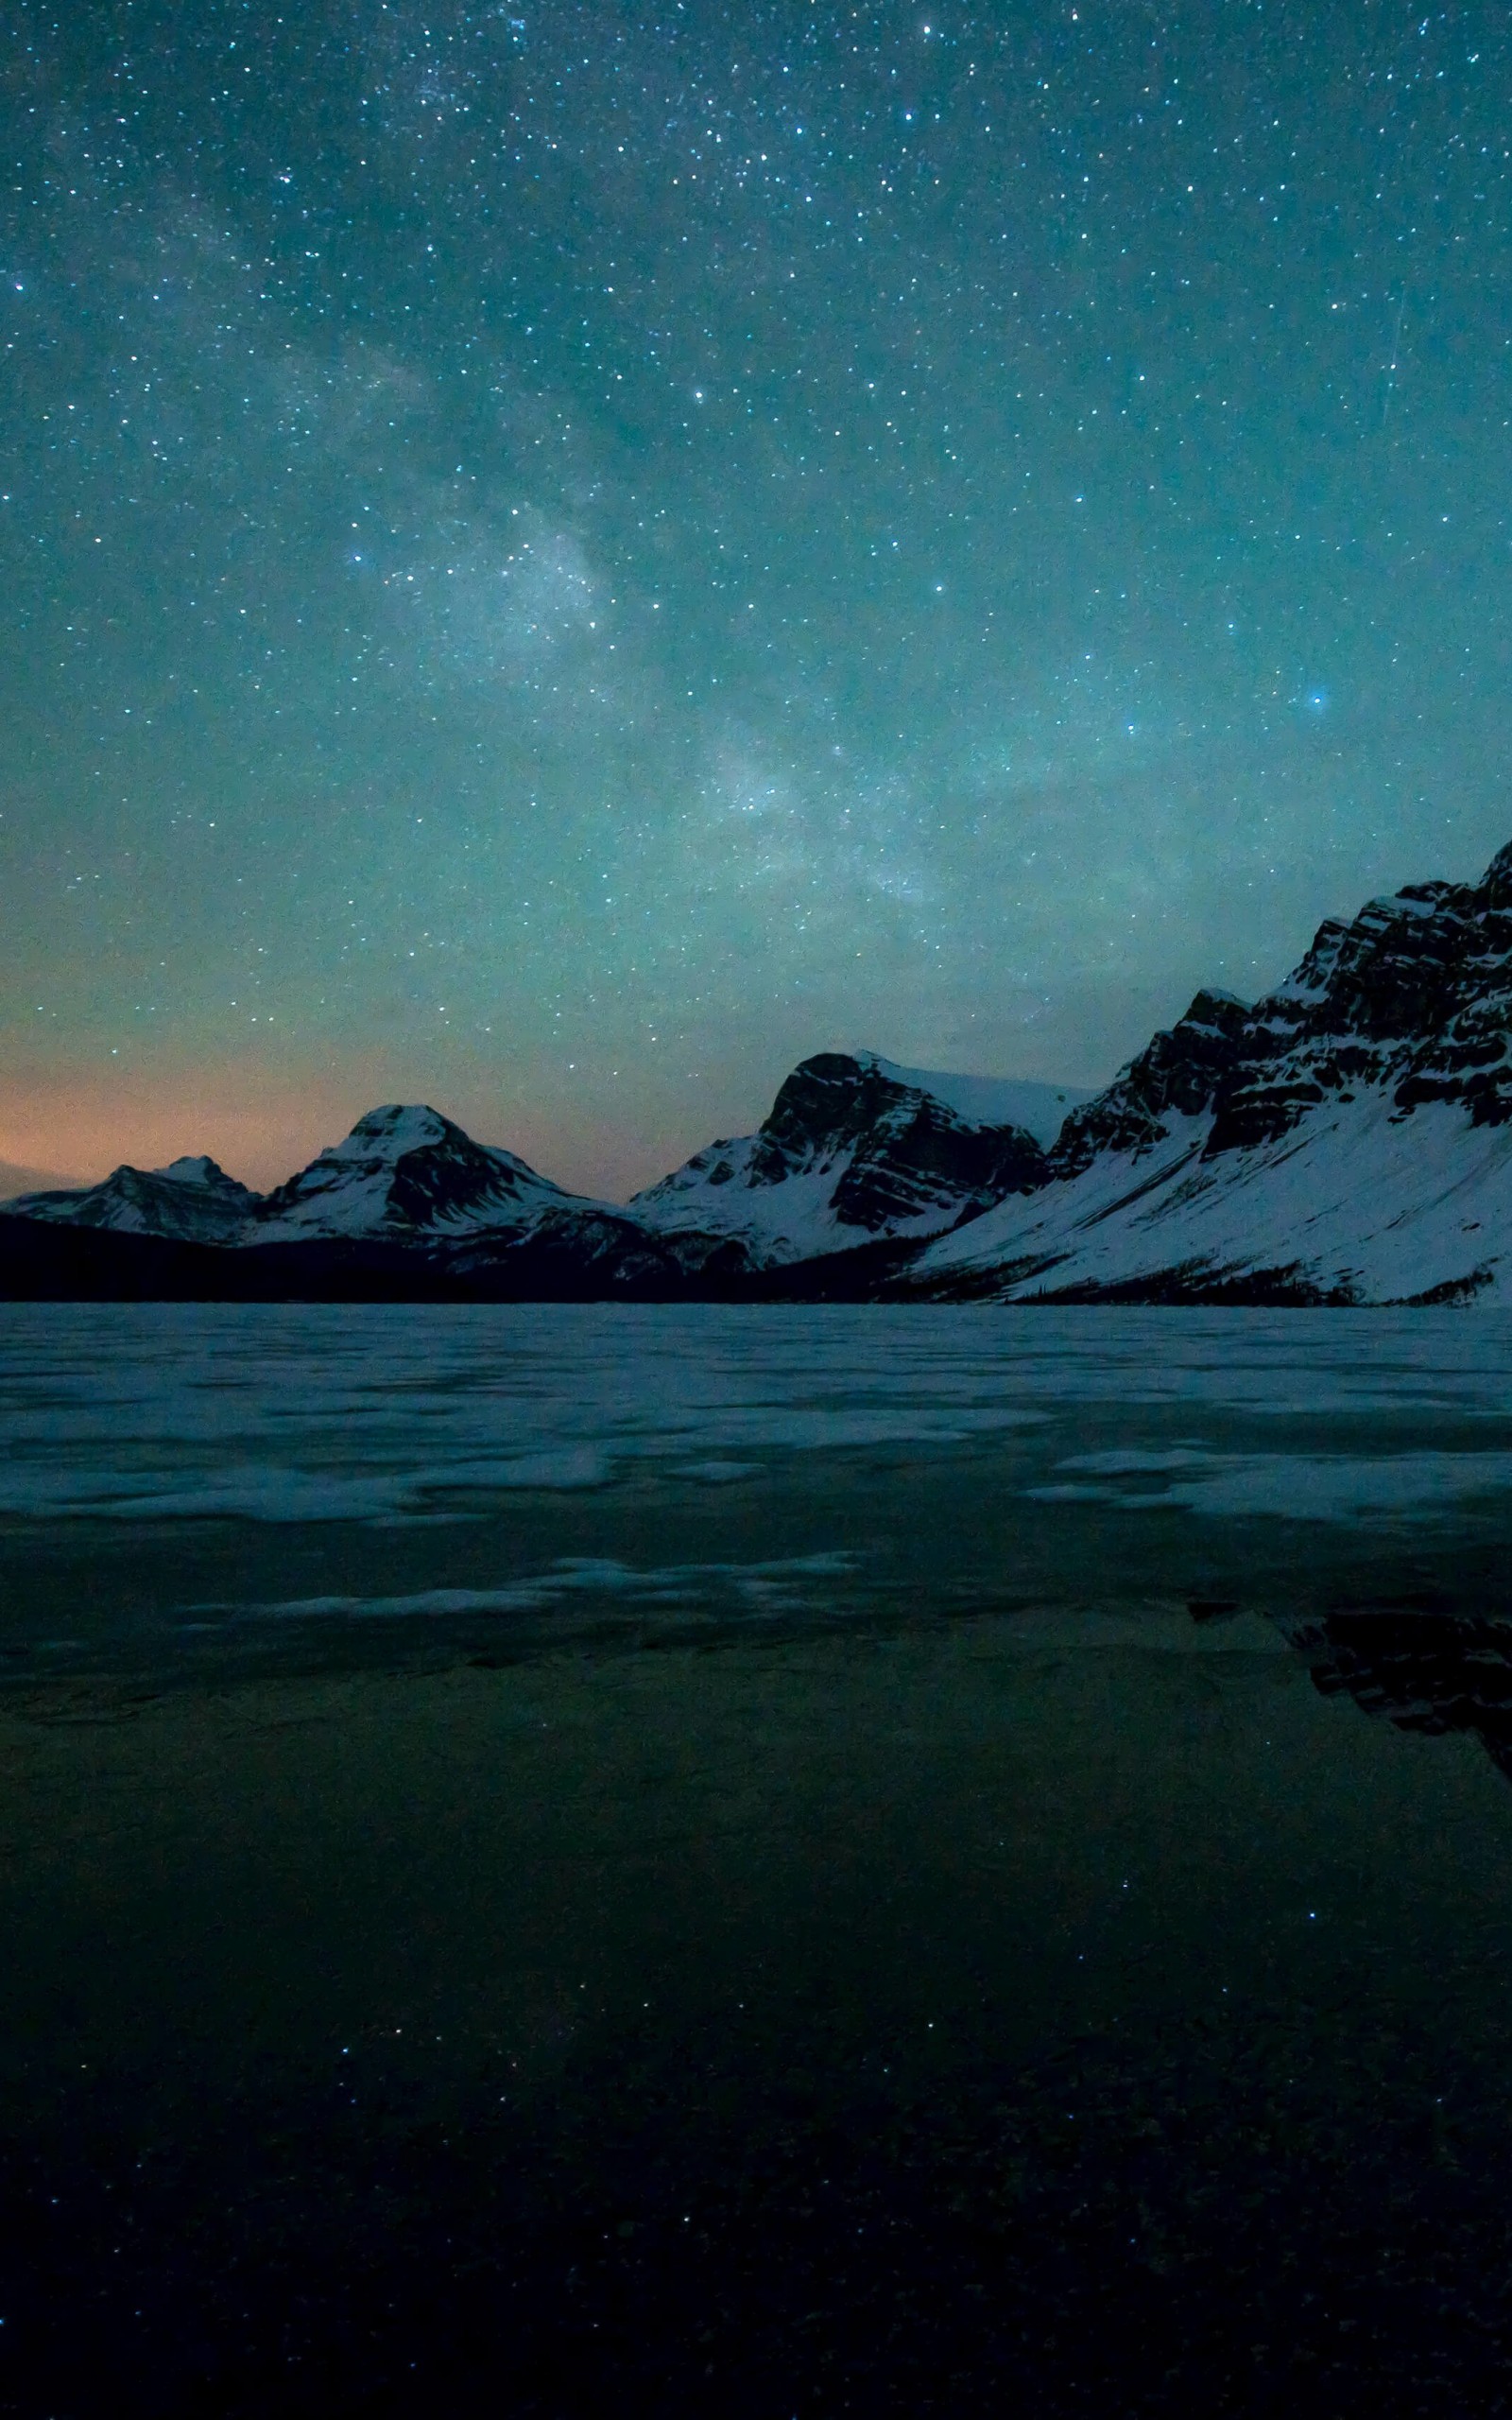 Milky Way over Bow Lake, Alberta, Canada Wallpaper for Amazon Kindle Fire HDX 8.9